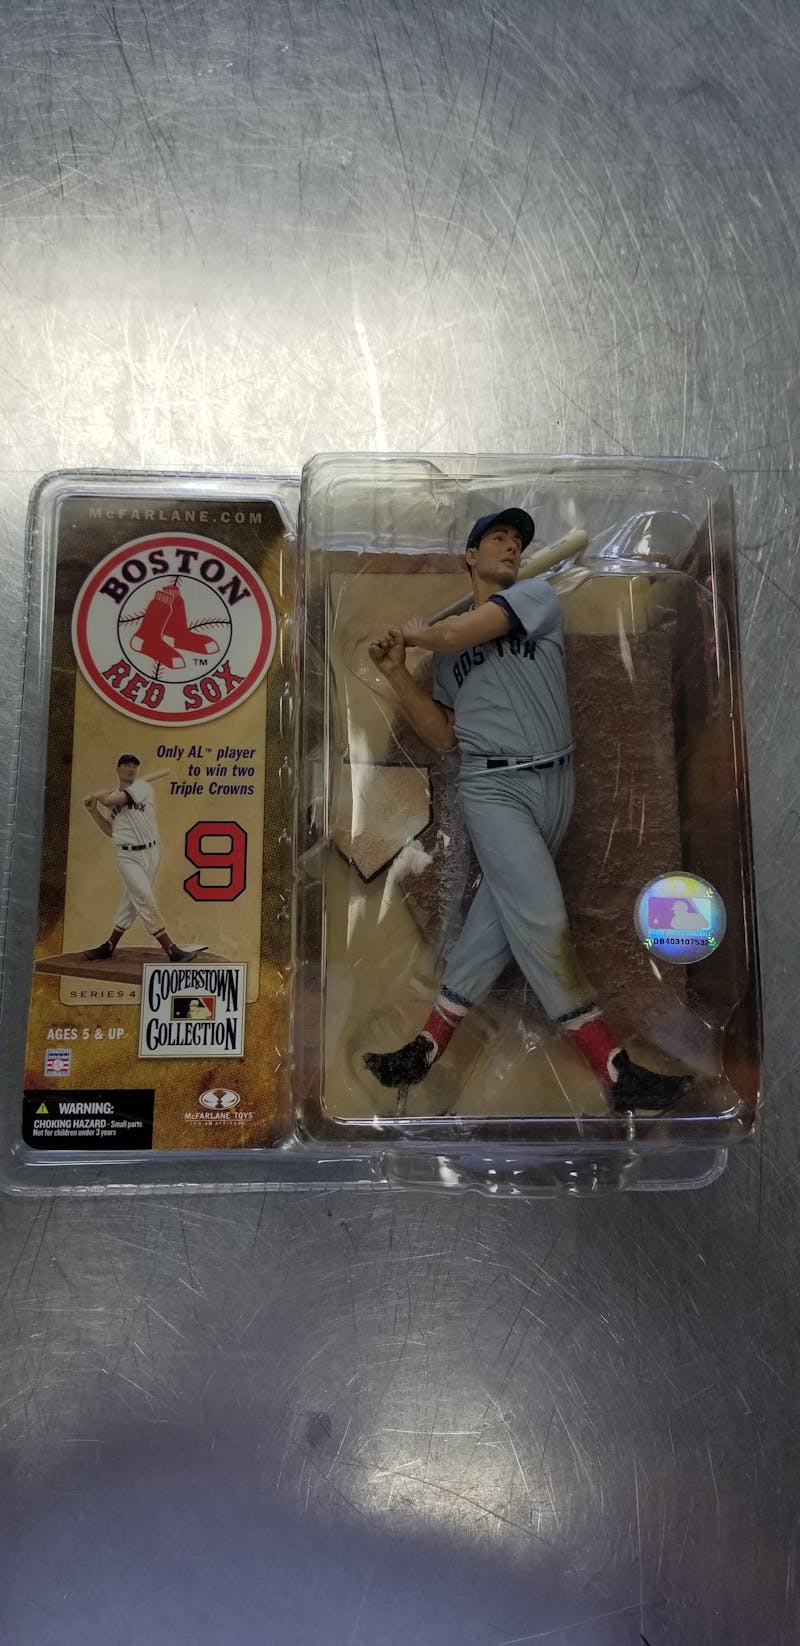 McFarlane MLB Boston Red Sox Cooperstown Collection Series 4